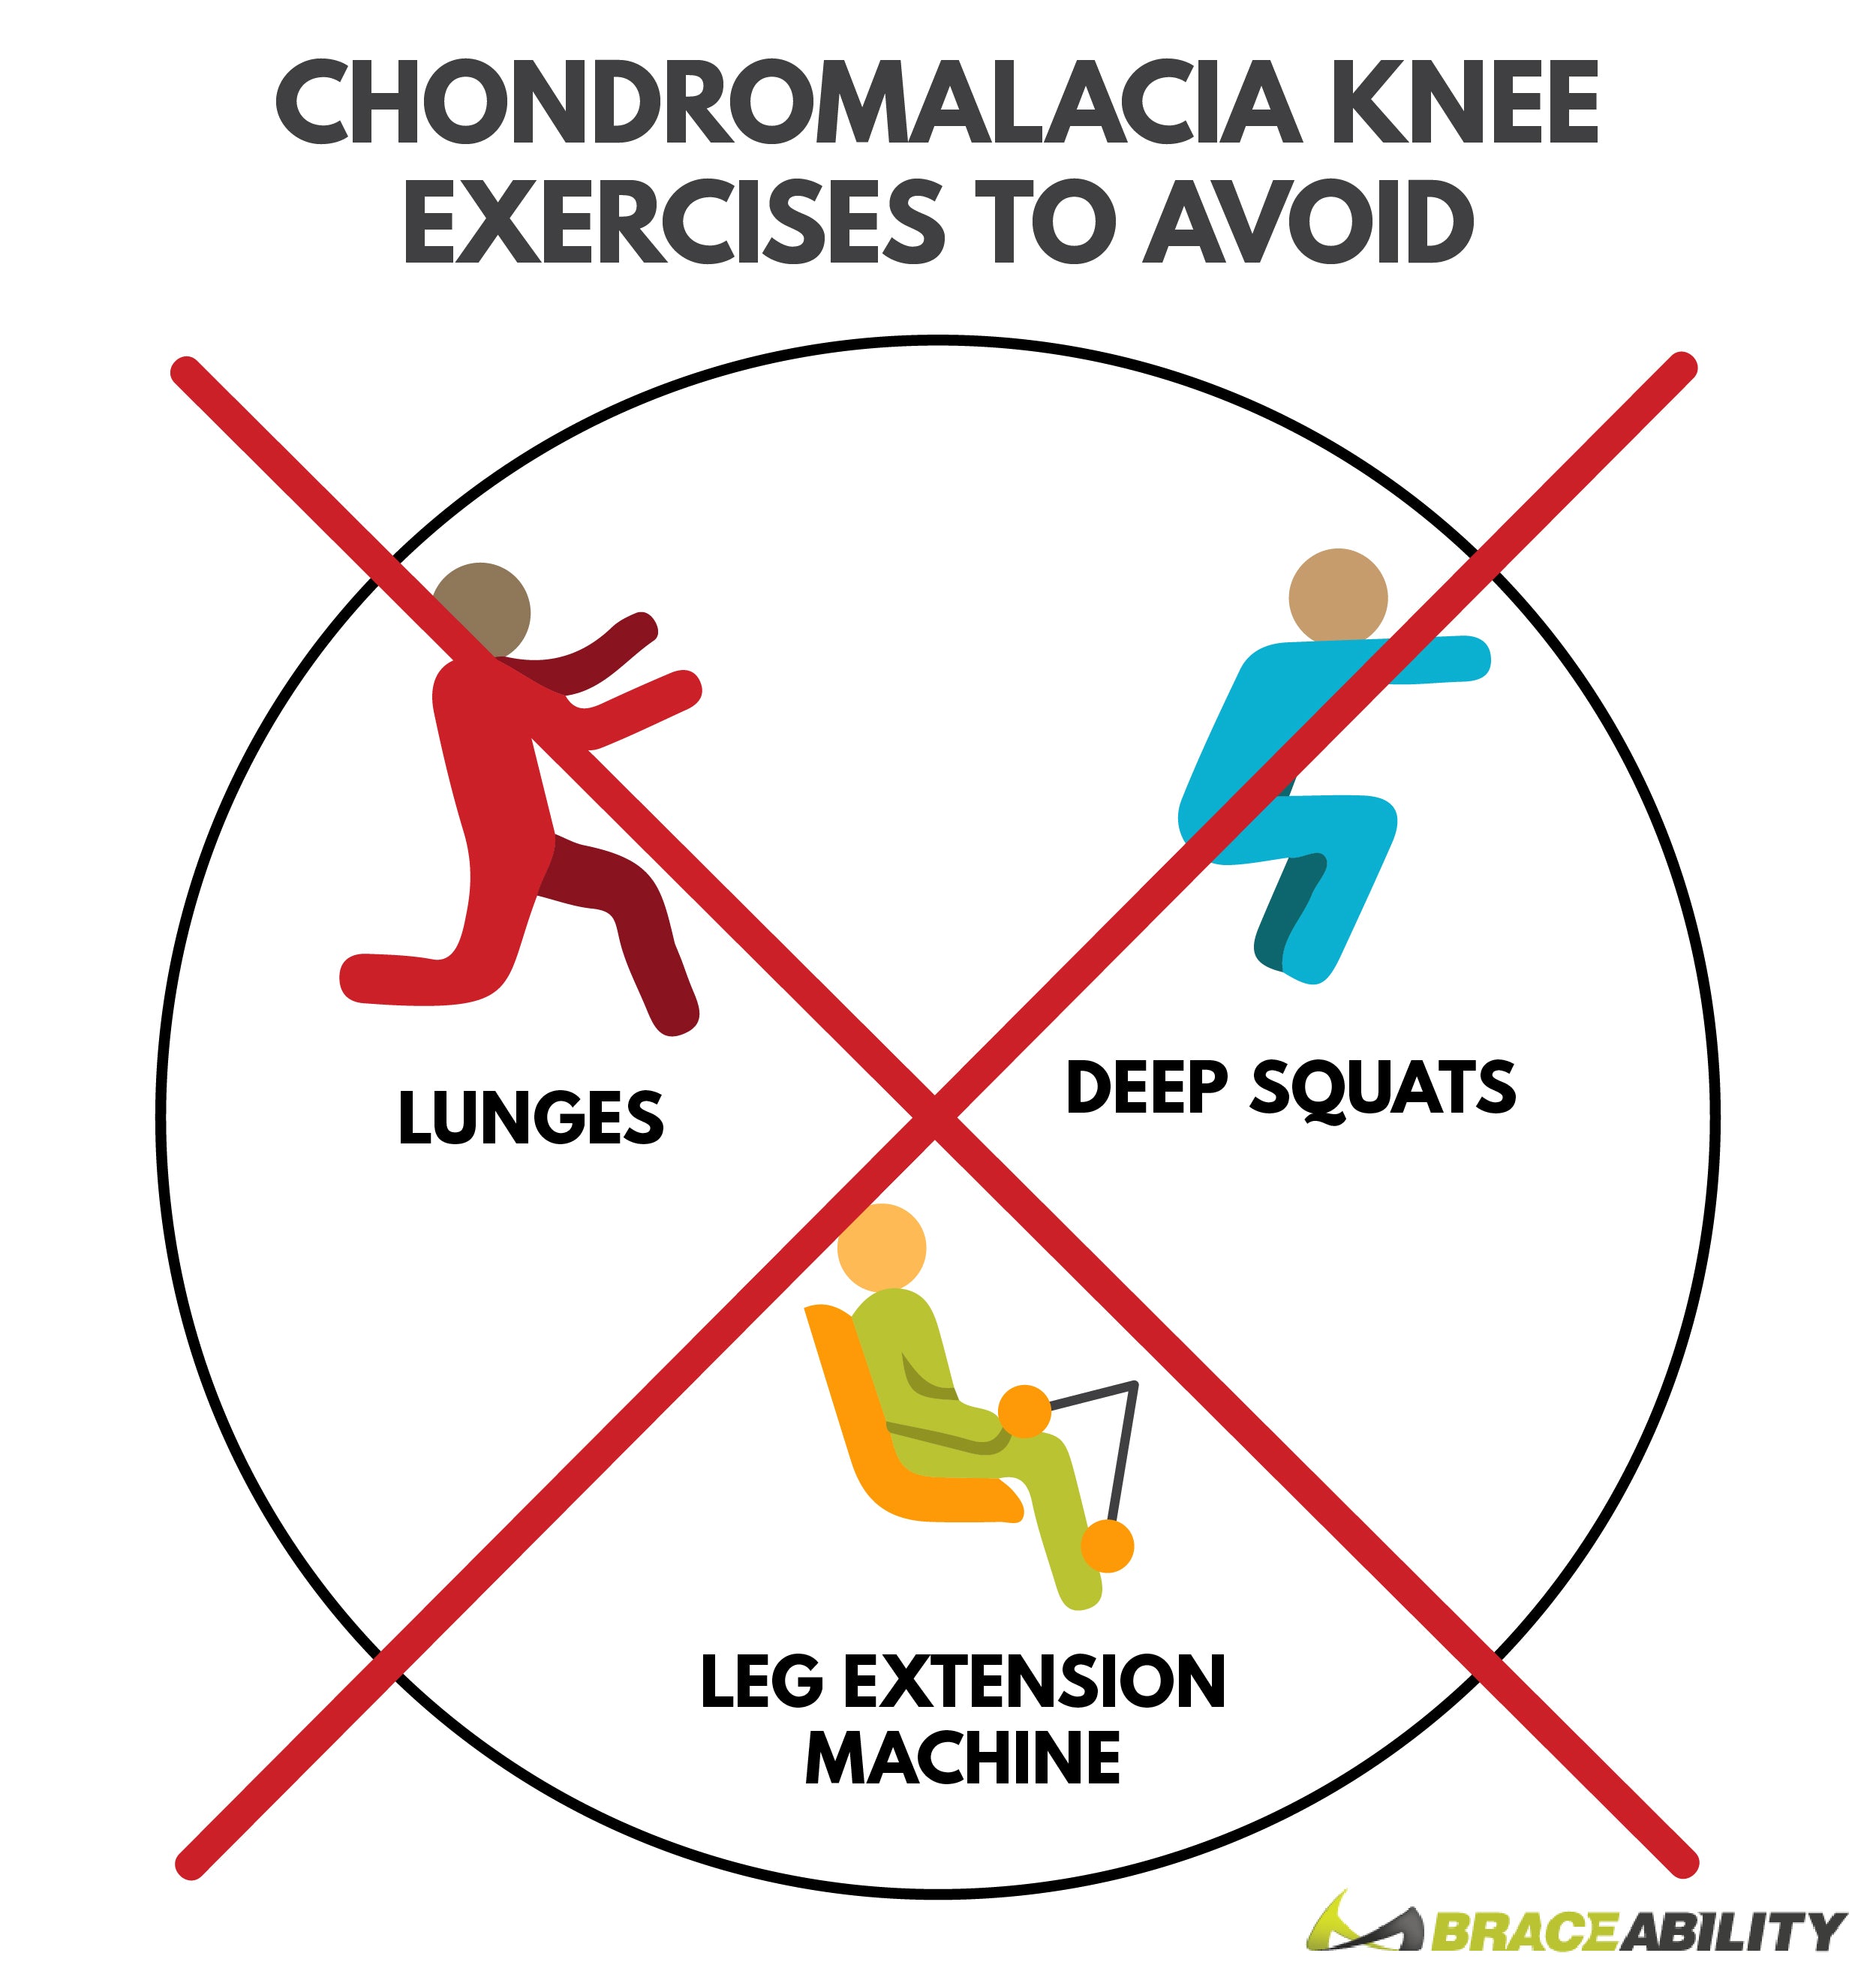 avoid doing exercises with excess knee flexion to keep your chondromalacia comfortable